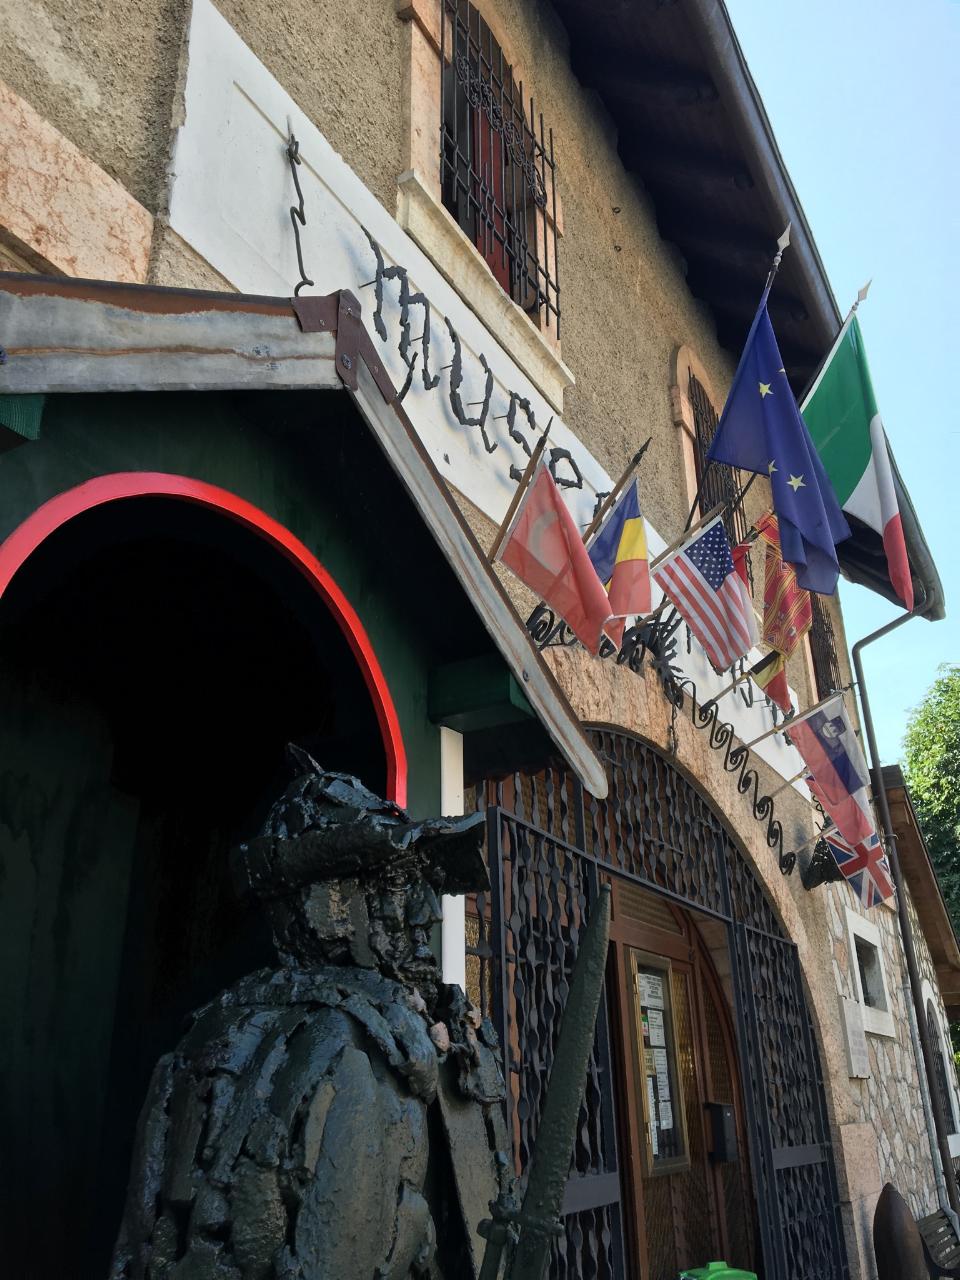 View of the front of a medieval building adorned with many flags. Standing close to the viewer is a sculpture of a soldier holding a sword.